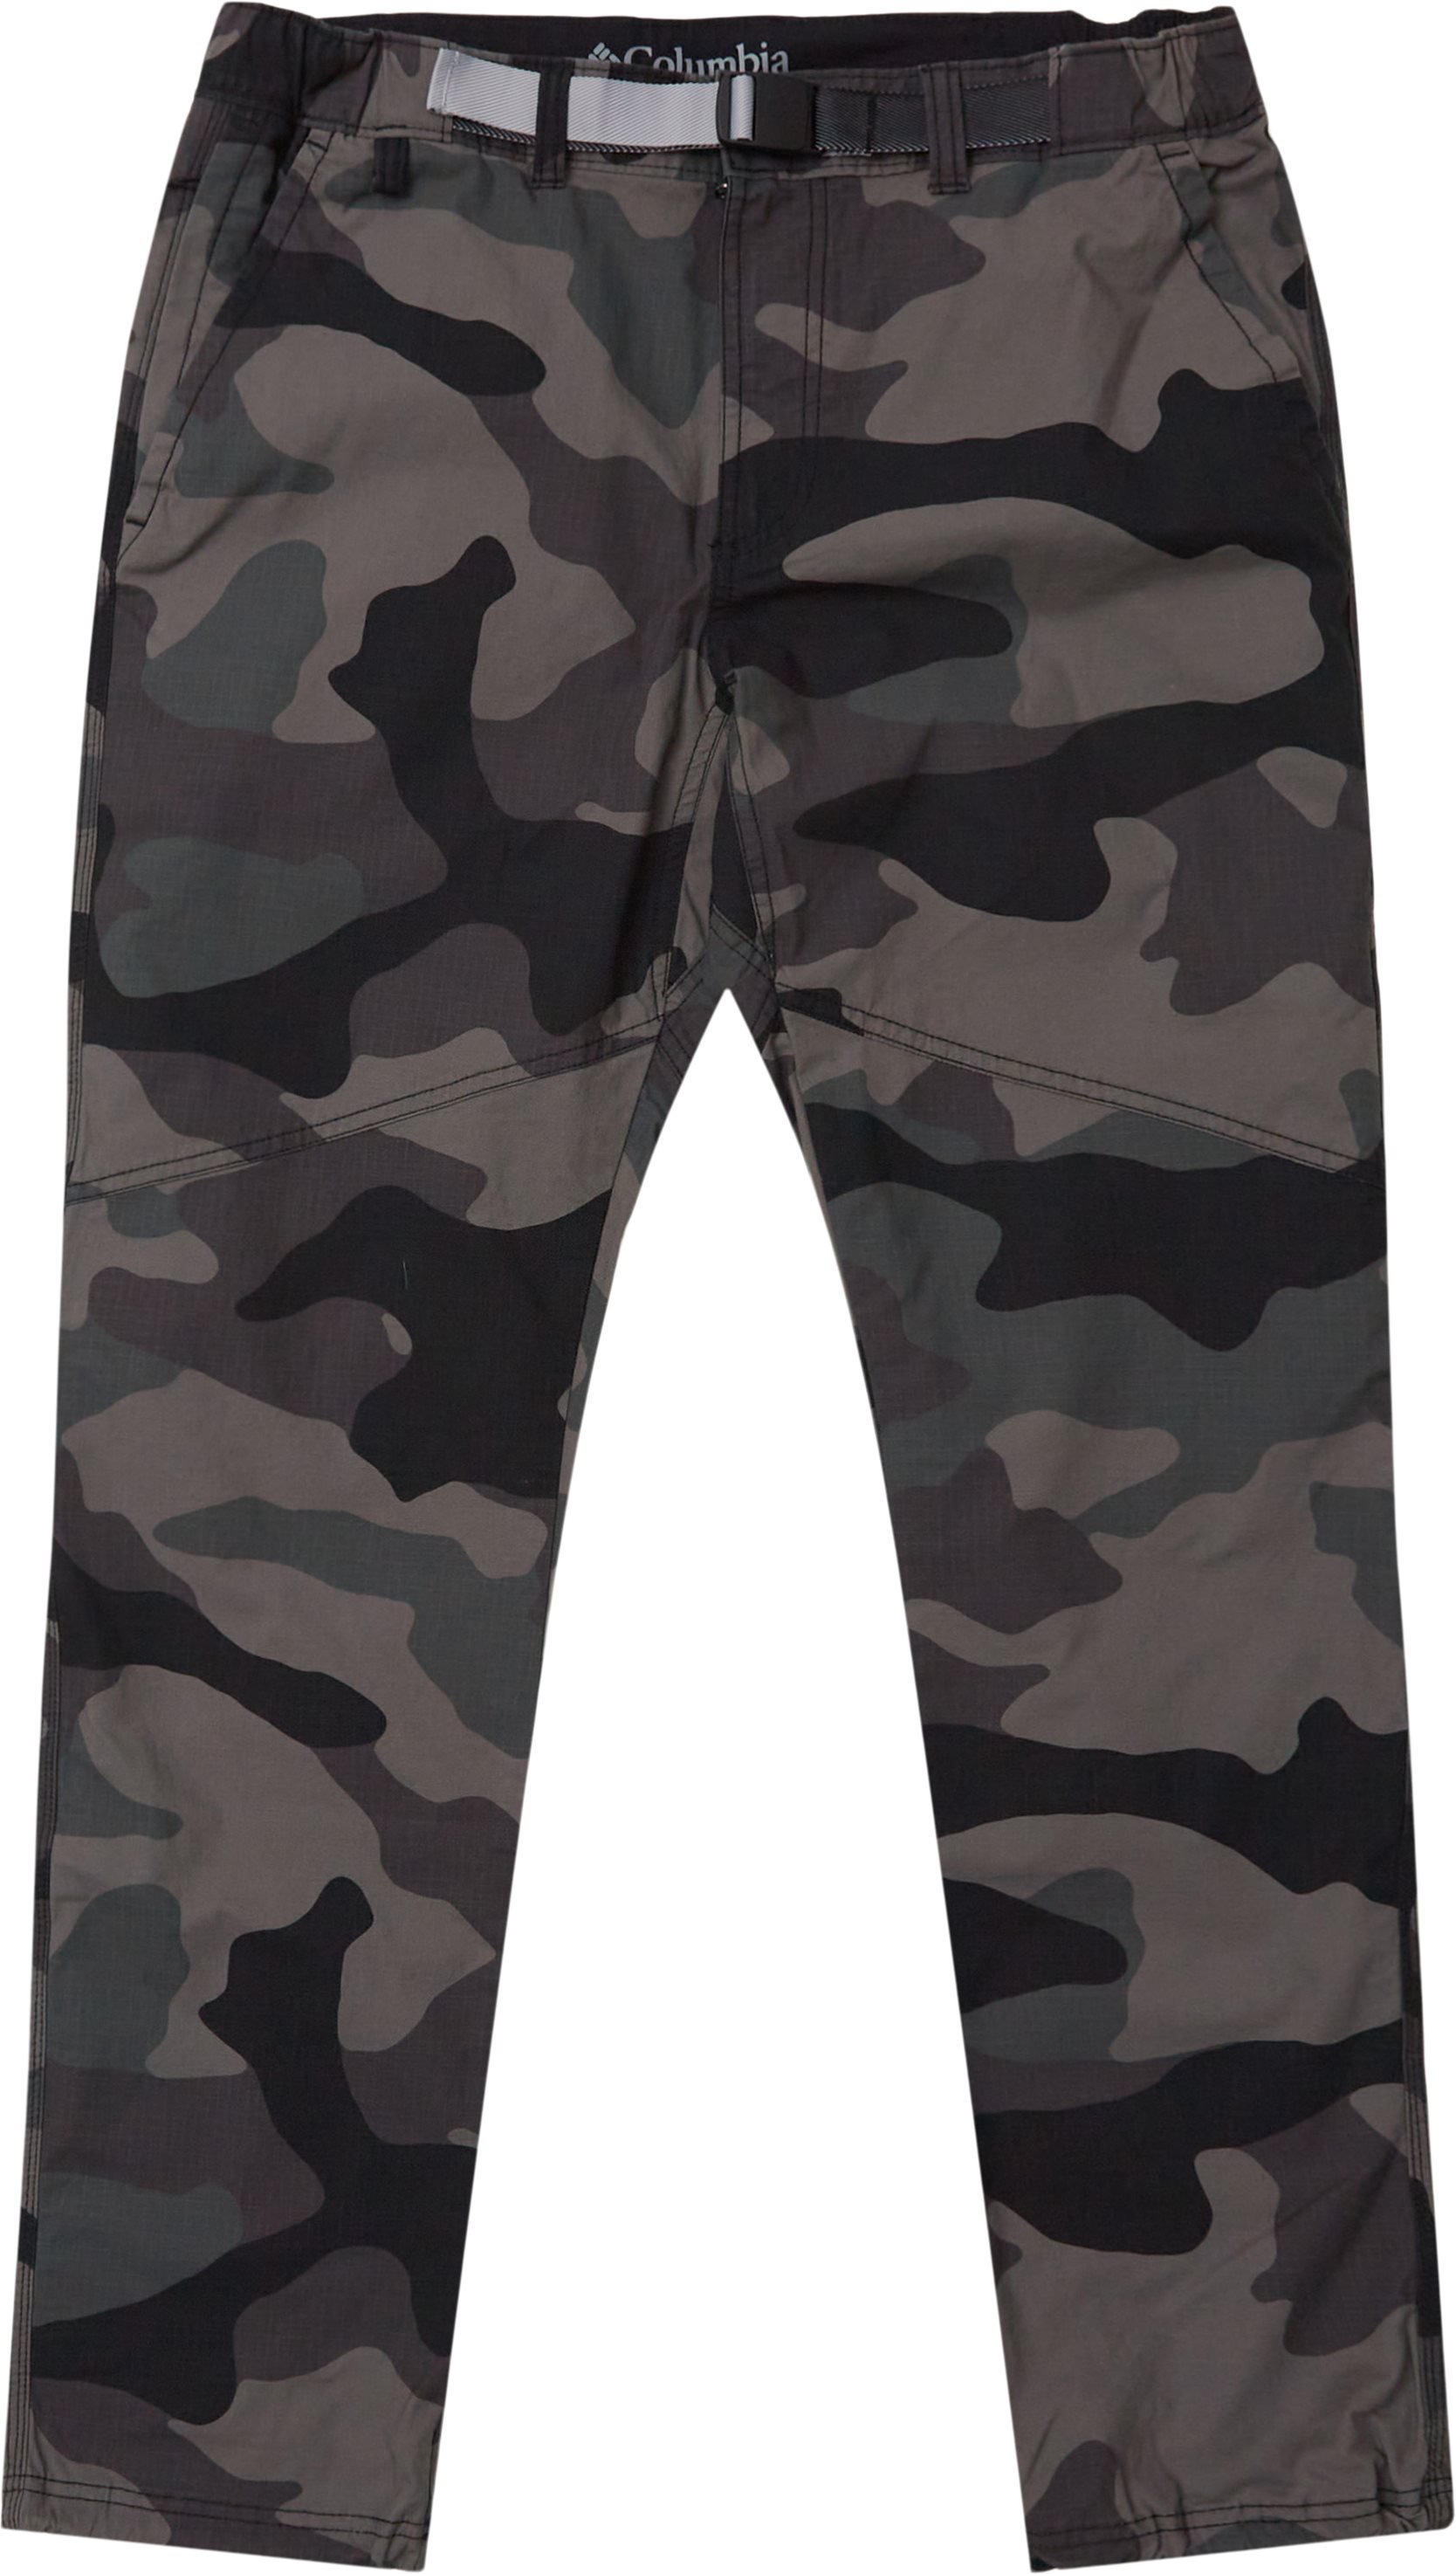 Columbia Trousers WALLOWA BELTED PANT Army